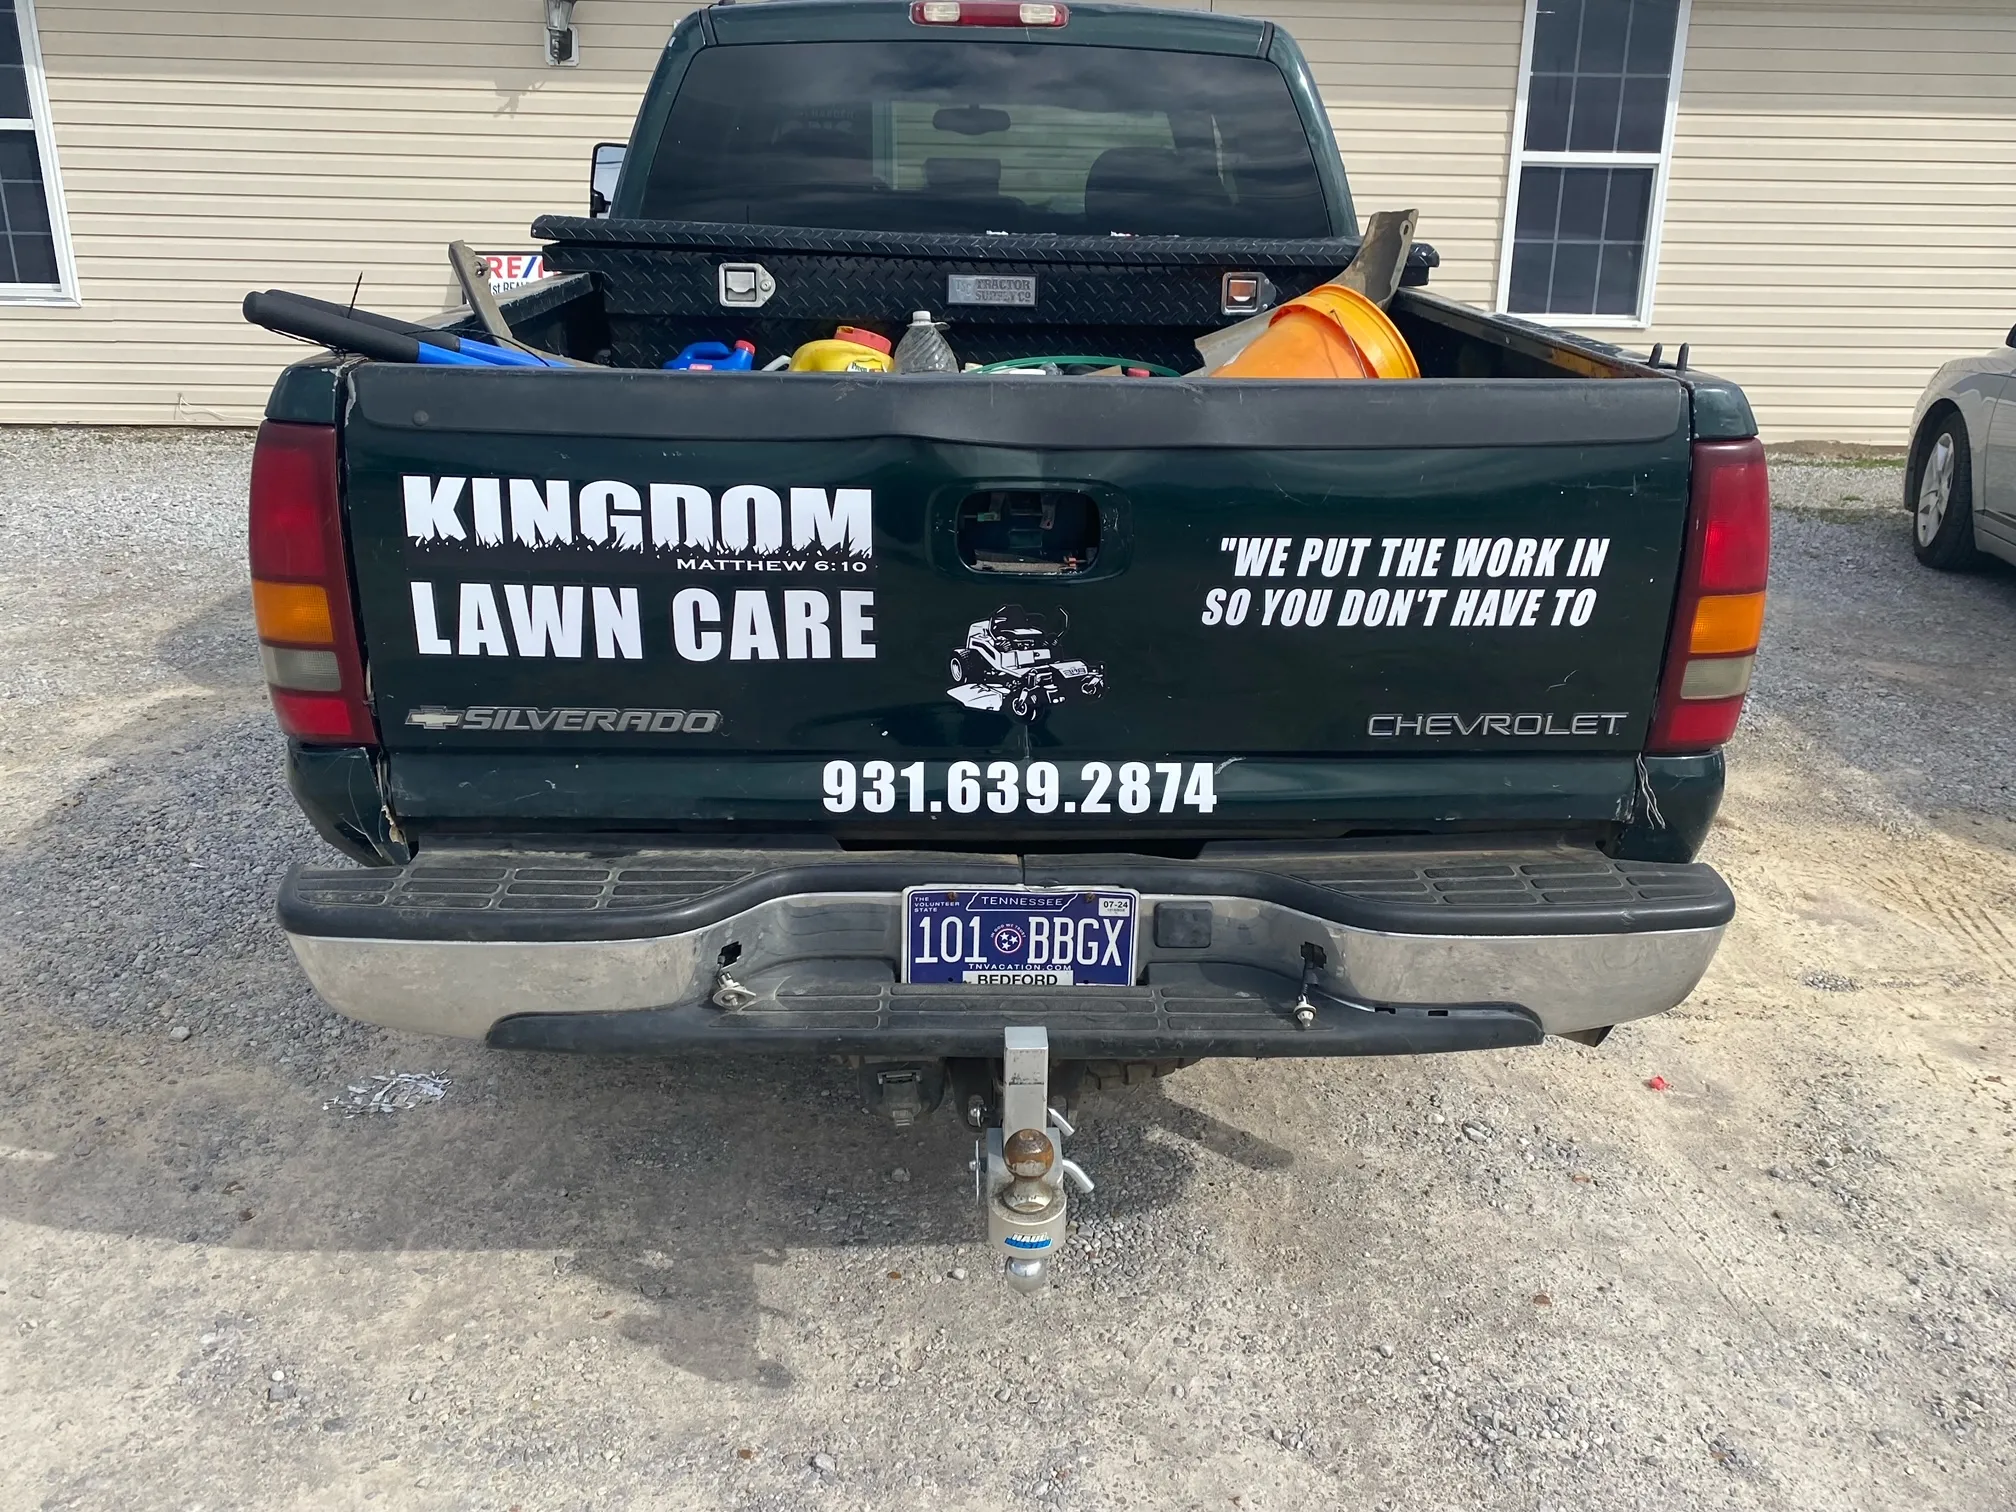 Mowing for Kingdom Lawn Care  in Tullahoma, TN